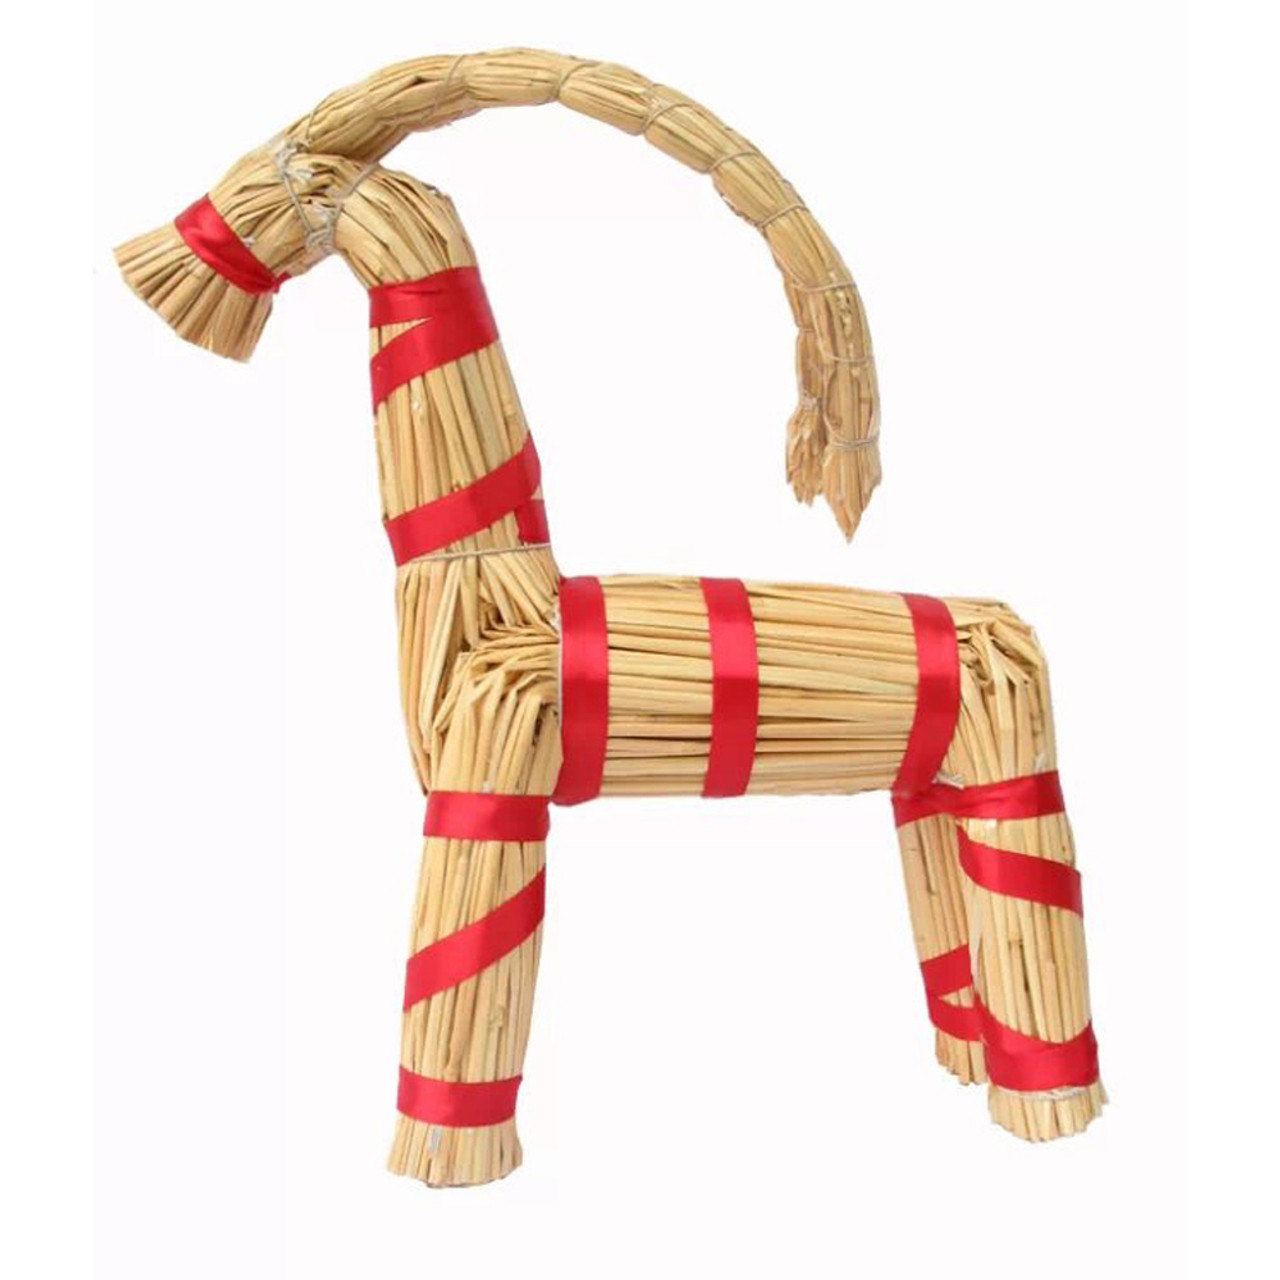 A Christmas straw goat